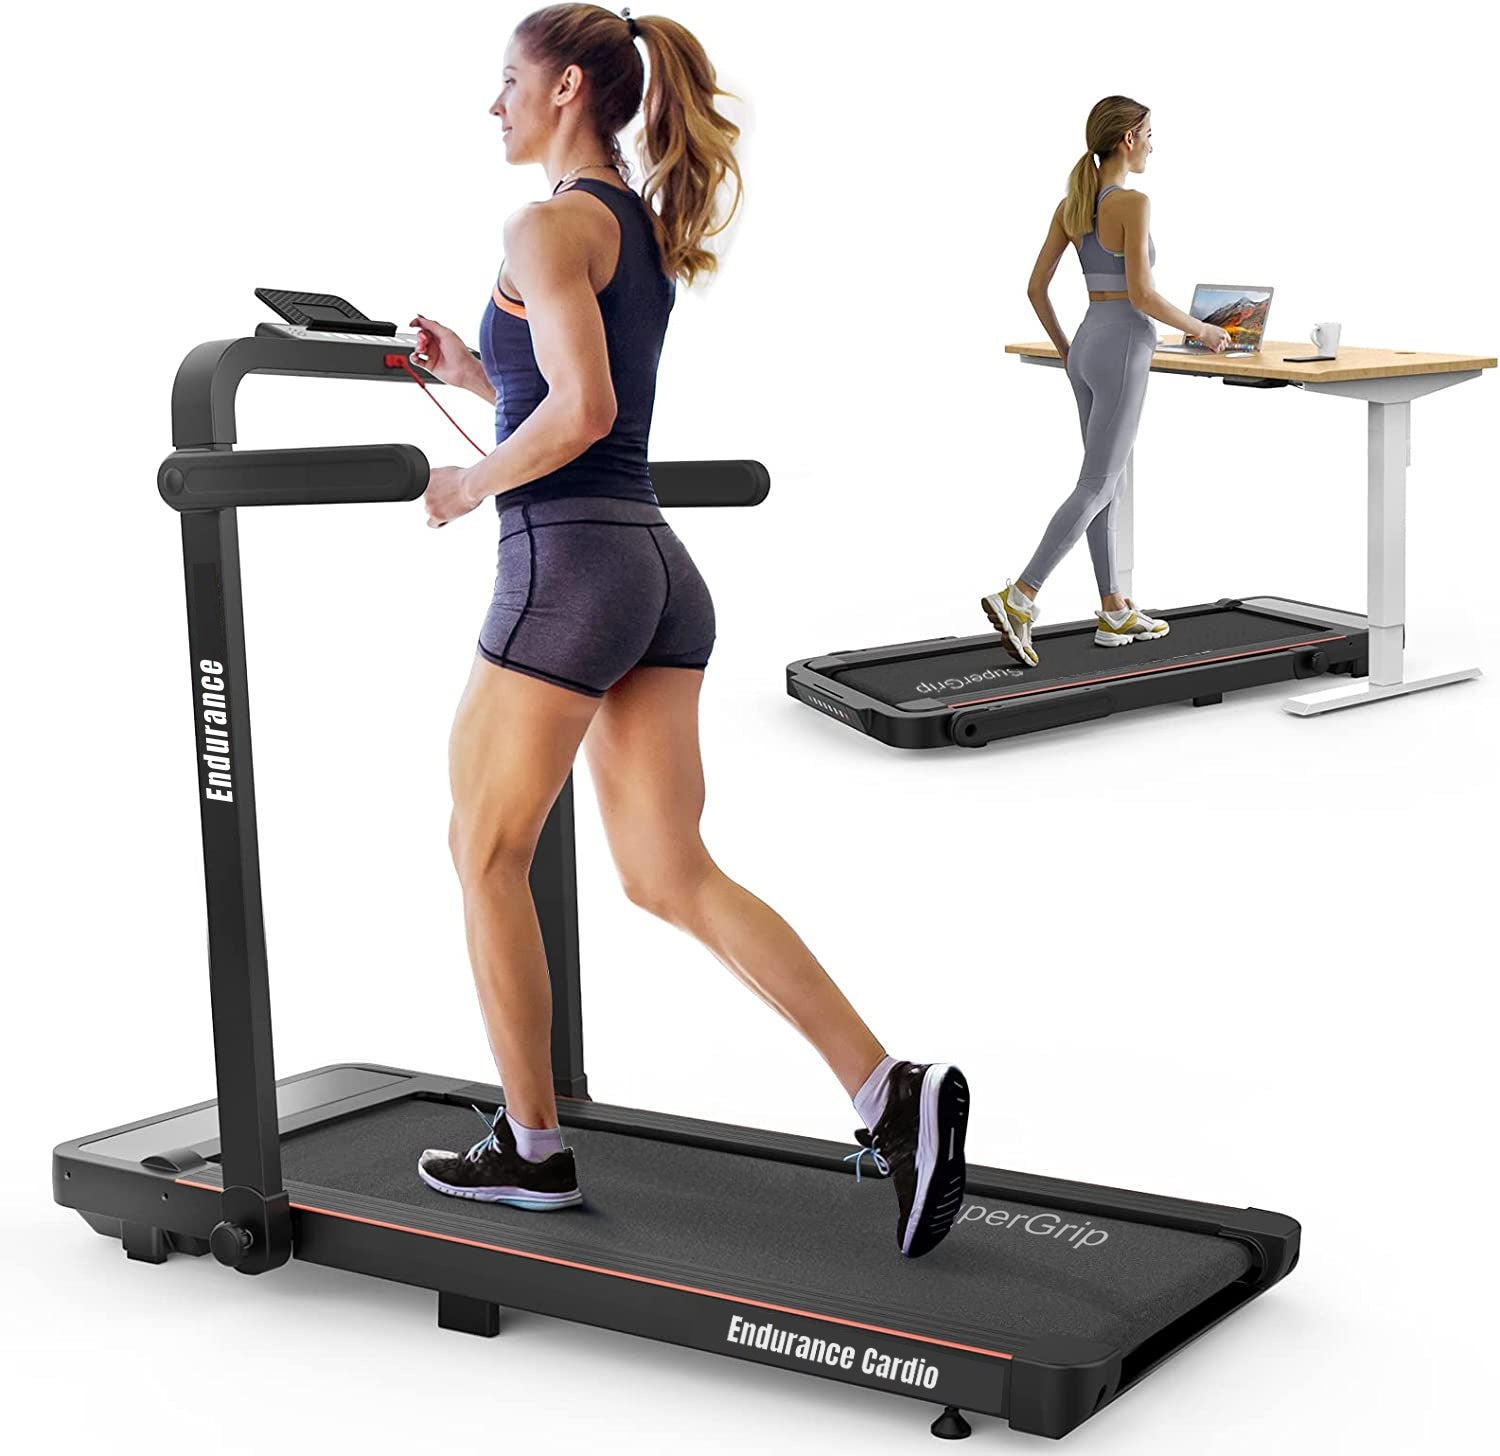 Treadmill for Sale Adelaide